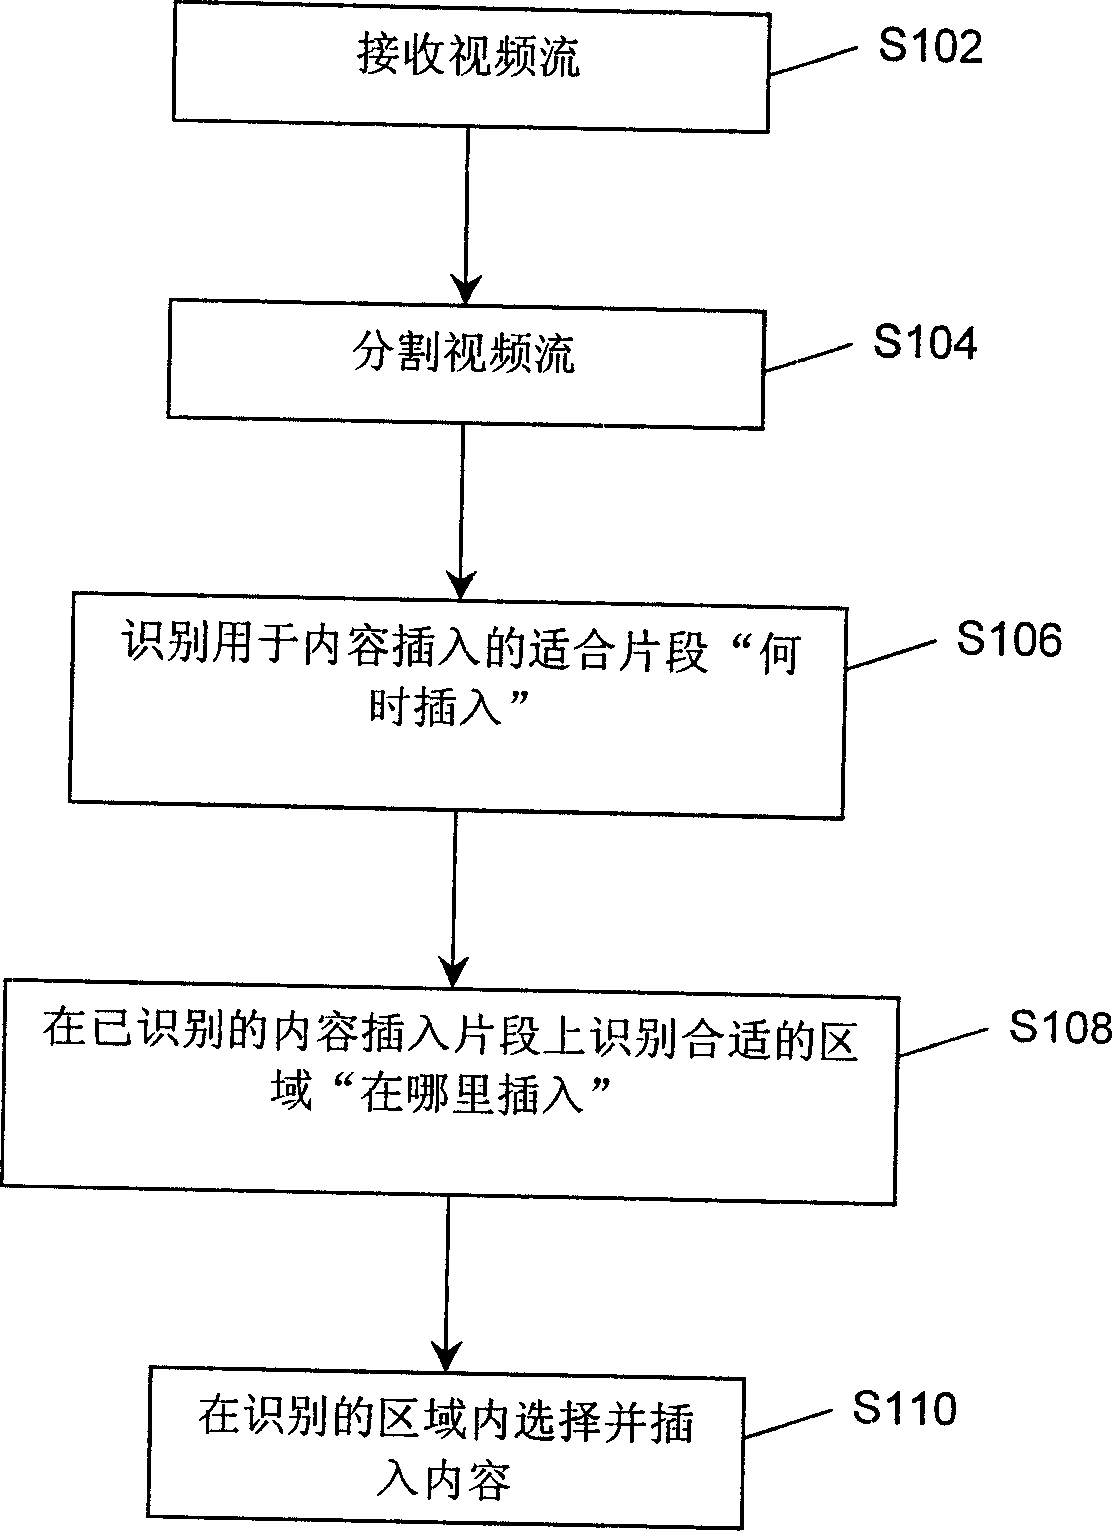 Method and apparatus for insertion of additional content into video